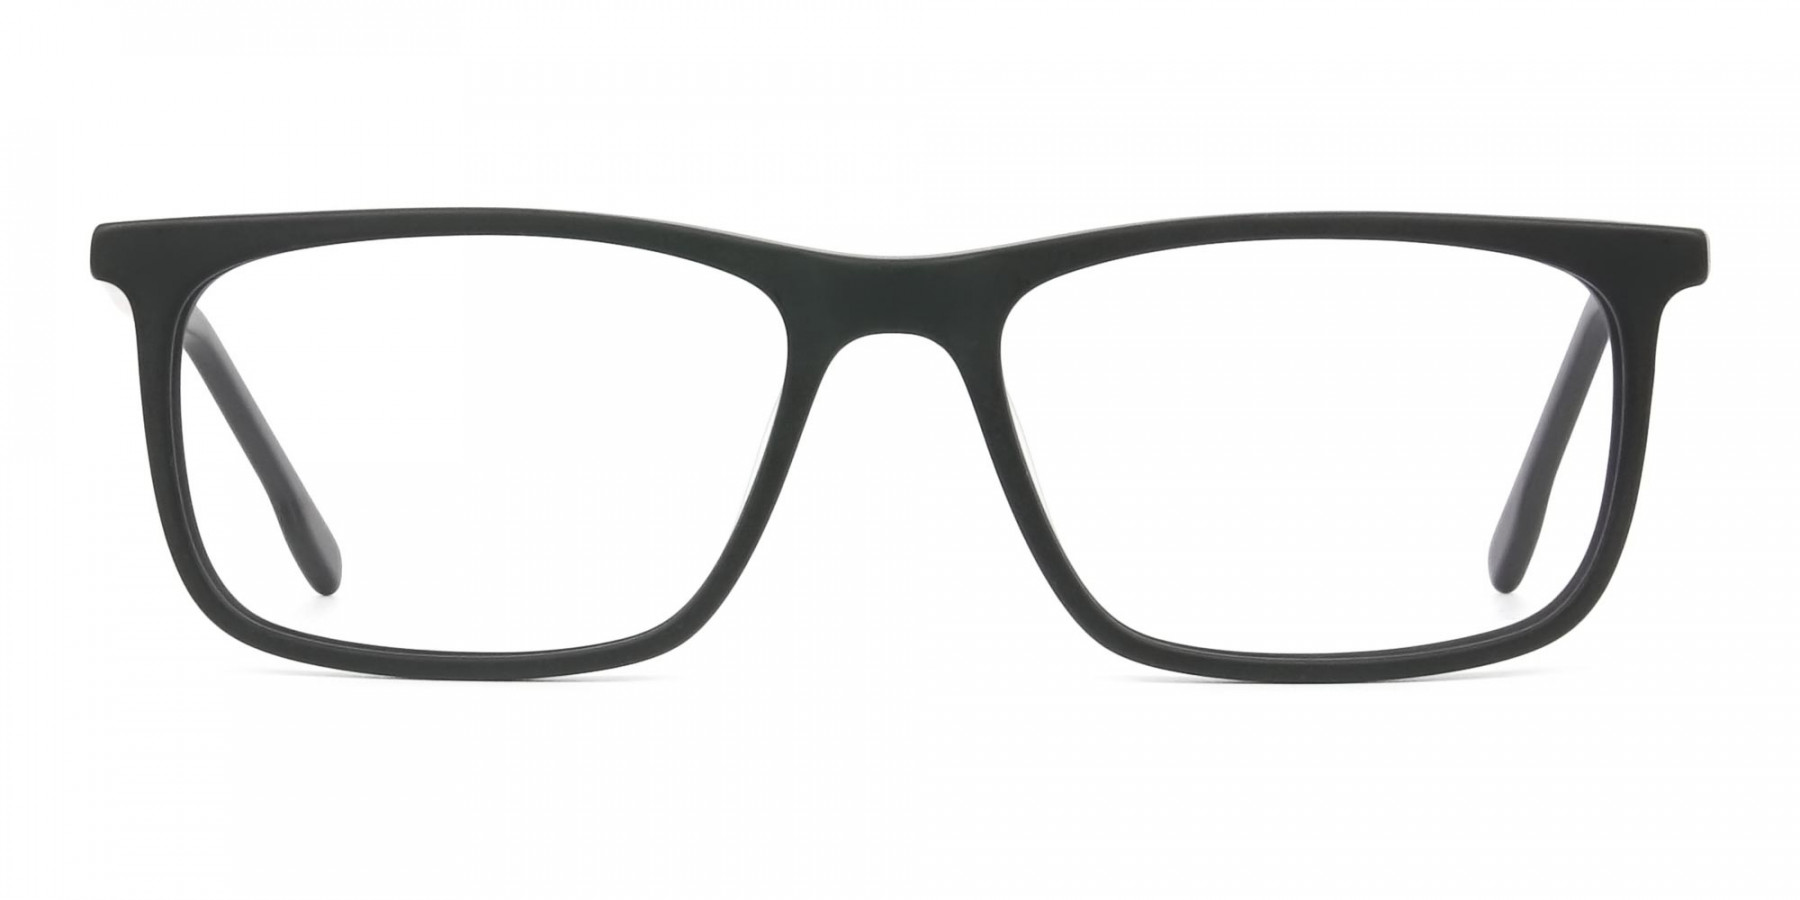 Matte Black & Red Acetate Spectacles - 1